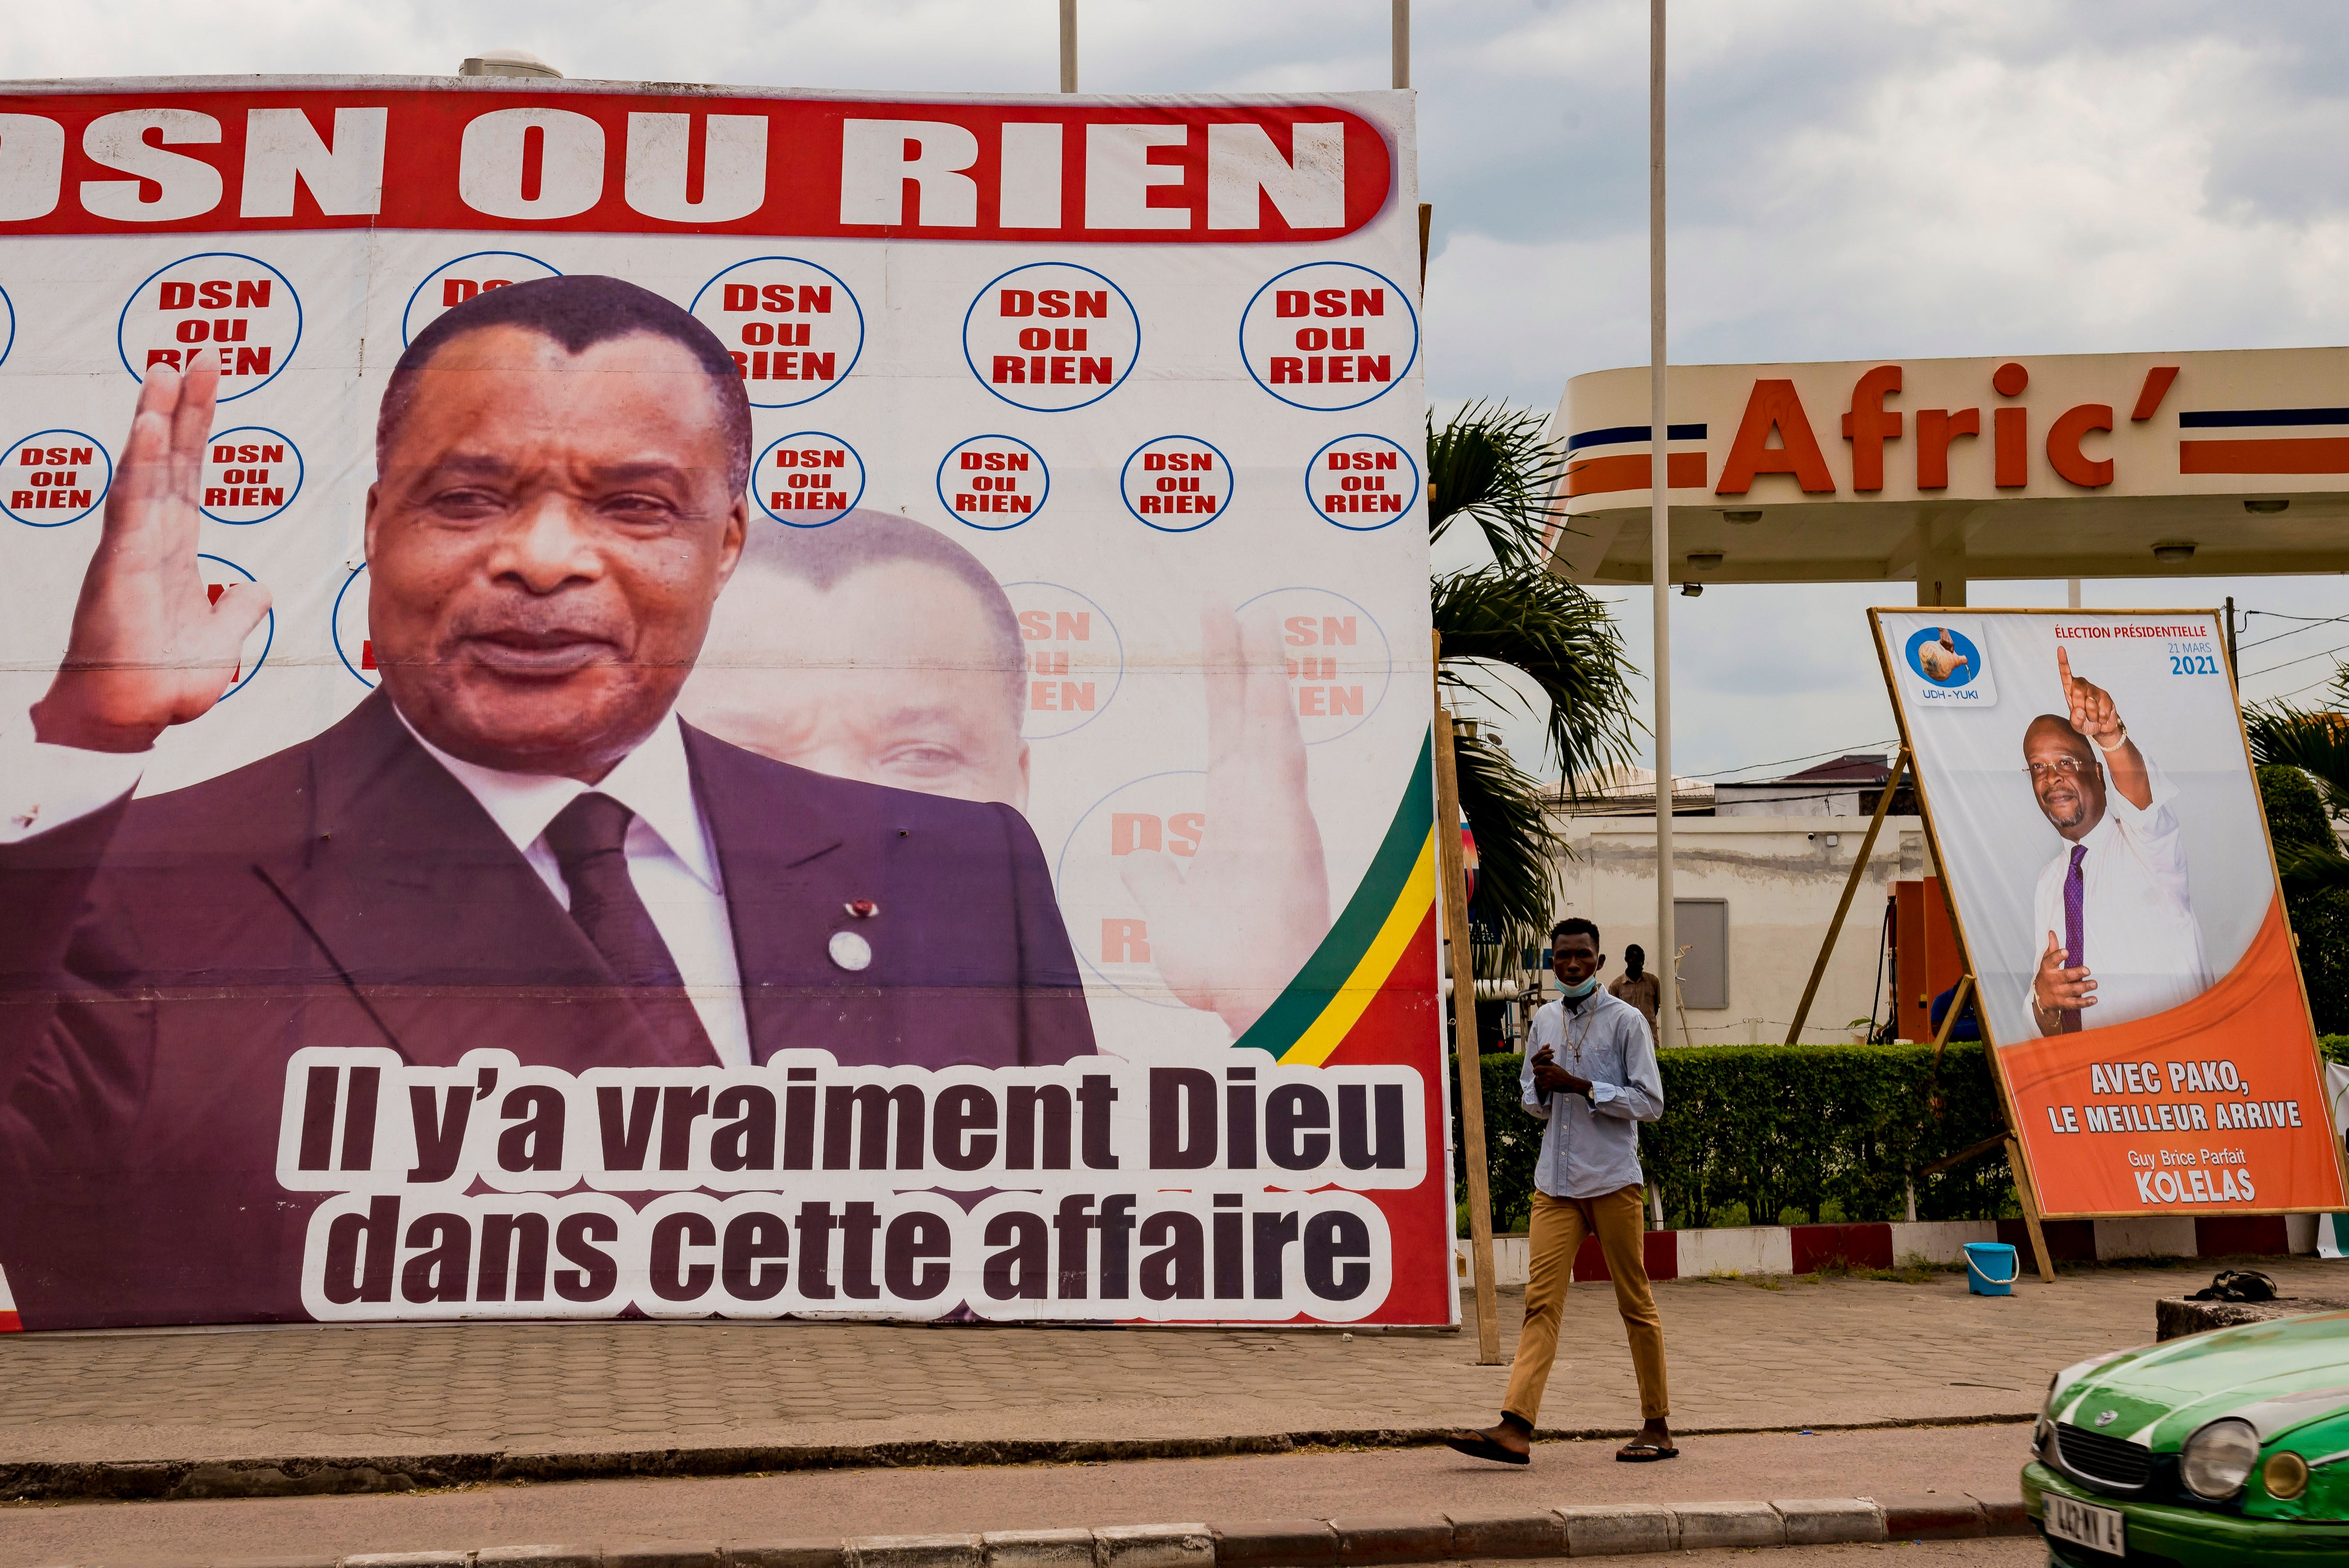 Election advertising for President Sassou Nguesso (left) and opposition candidate Guy Brice Parfair Kotelas (right)